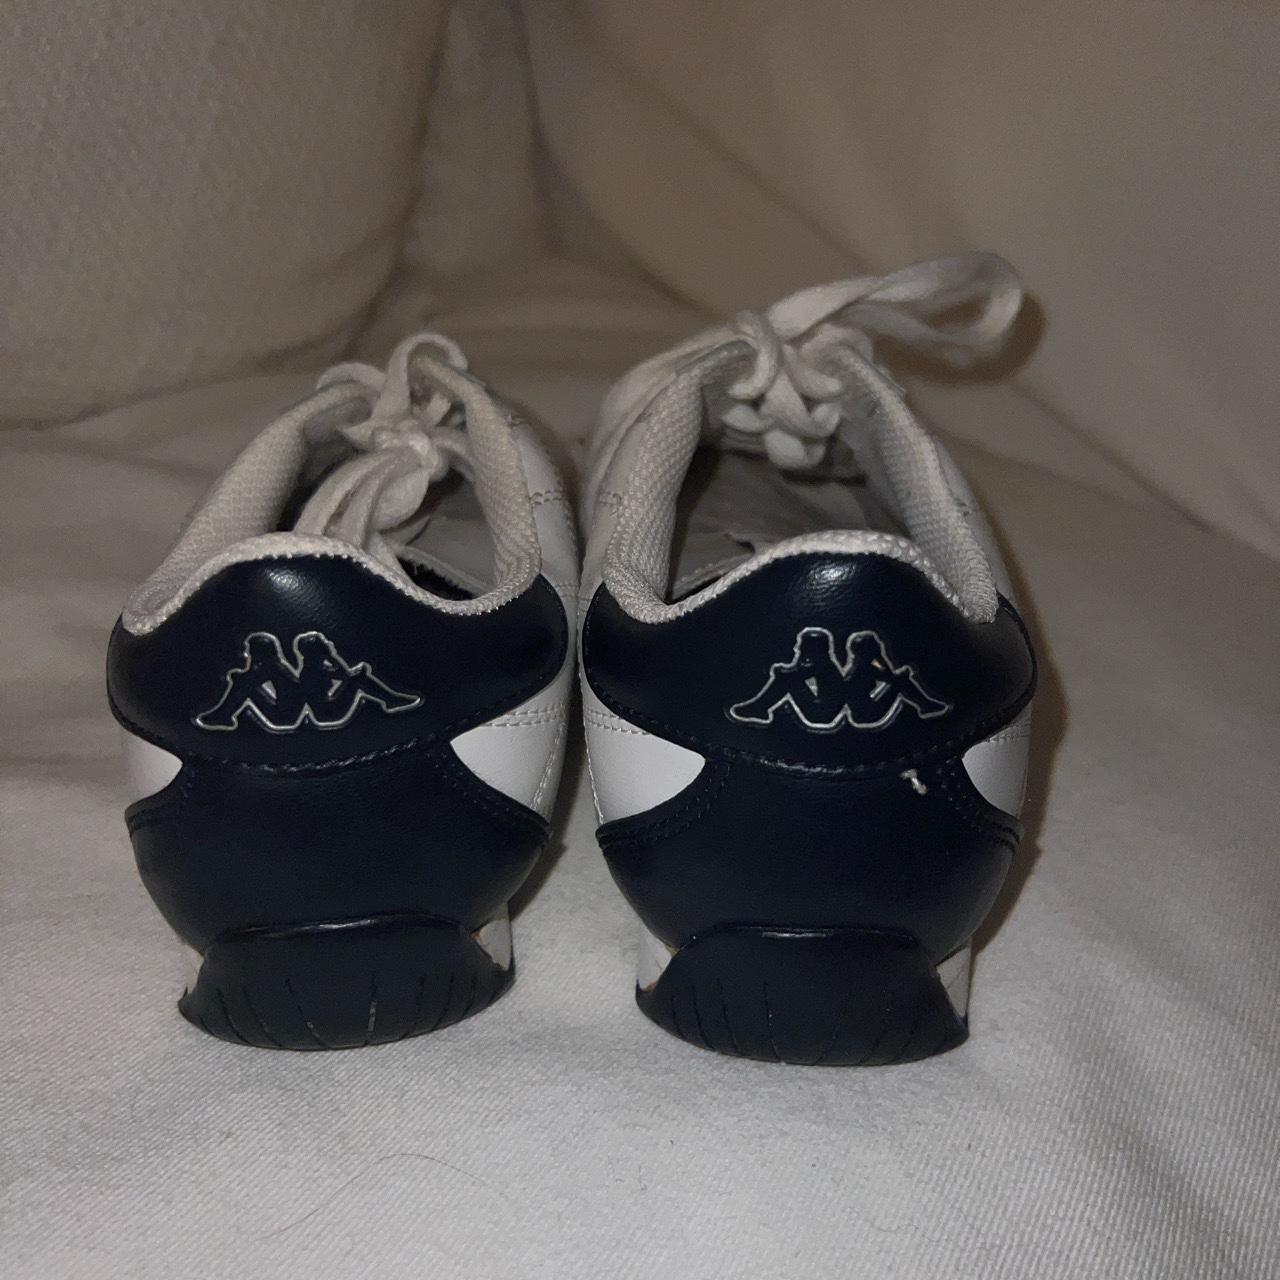 Vintage Kappa sneakers! Purchases Depop Slovenia. in Size - 39